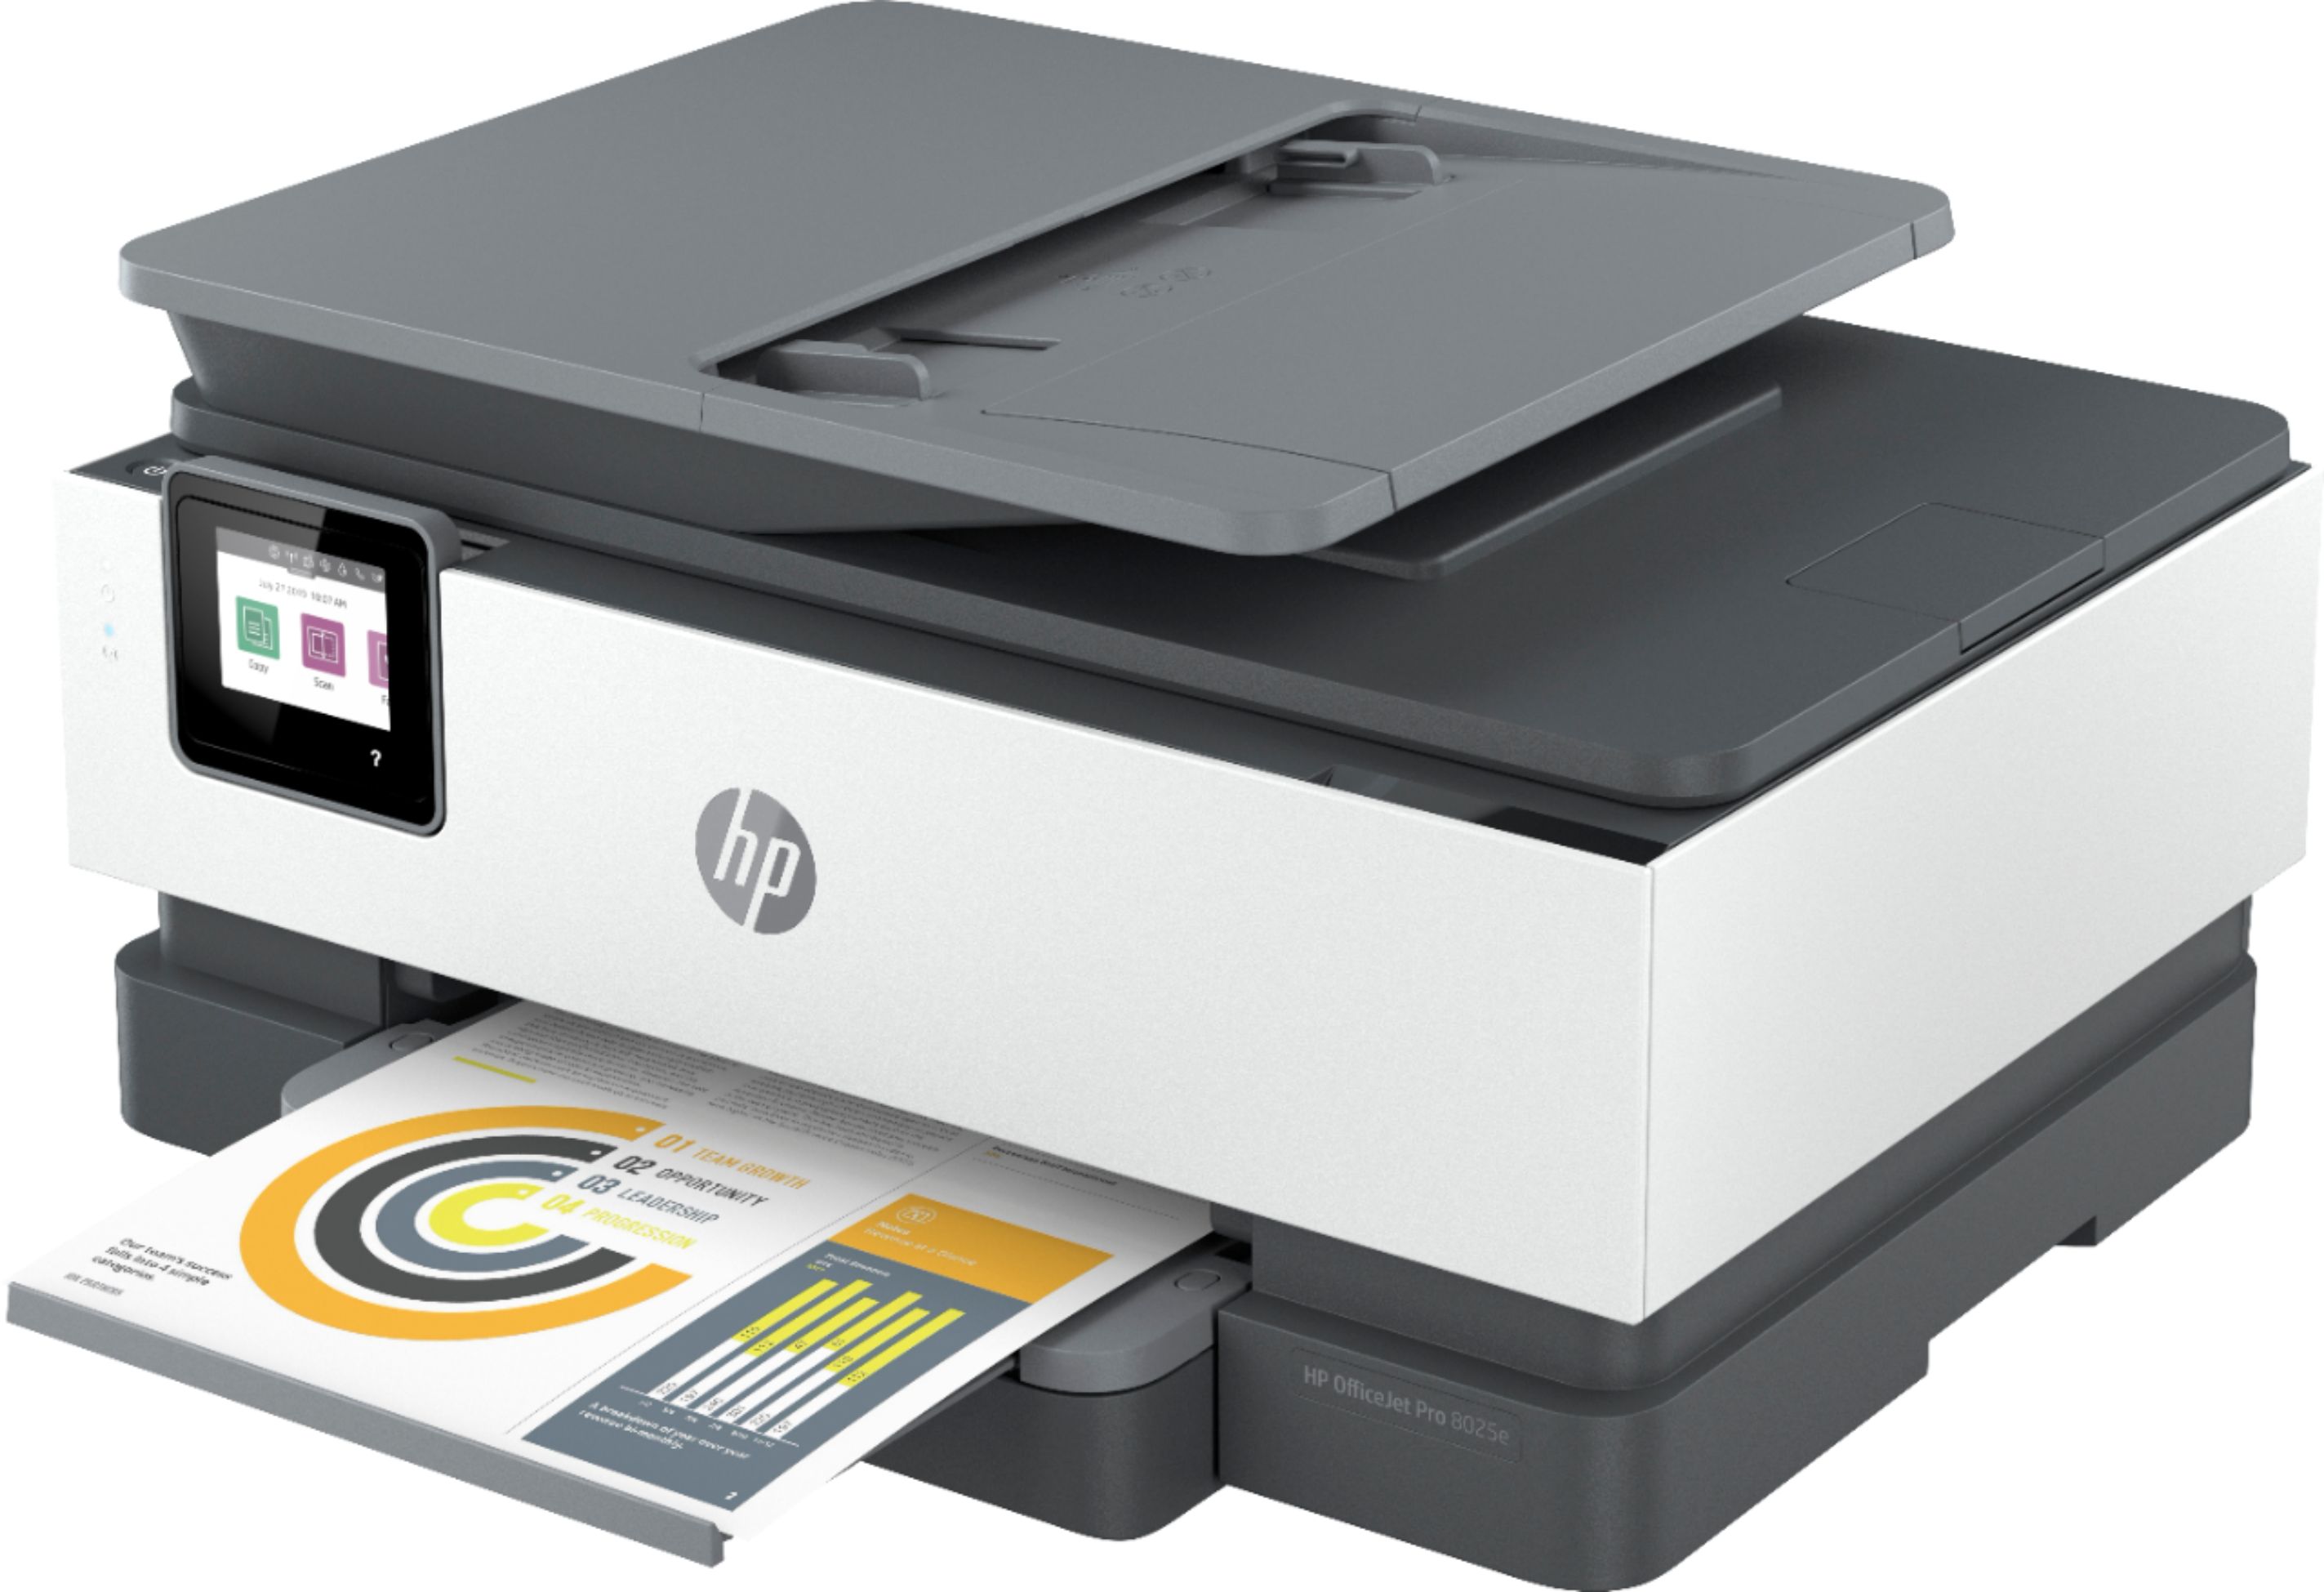 Angle View: HP - OfficeJet Pro 8025e Wireless All-In-One Inkjet Printer with 6 months of Instant Ink Included with HP+ - White